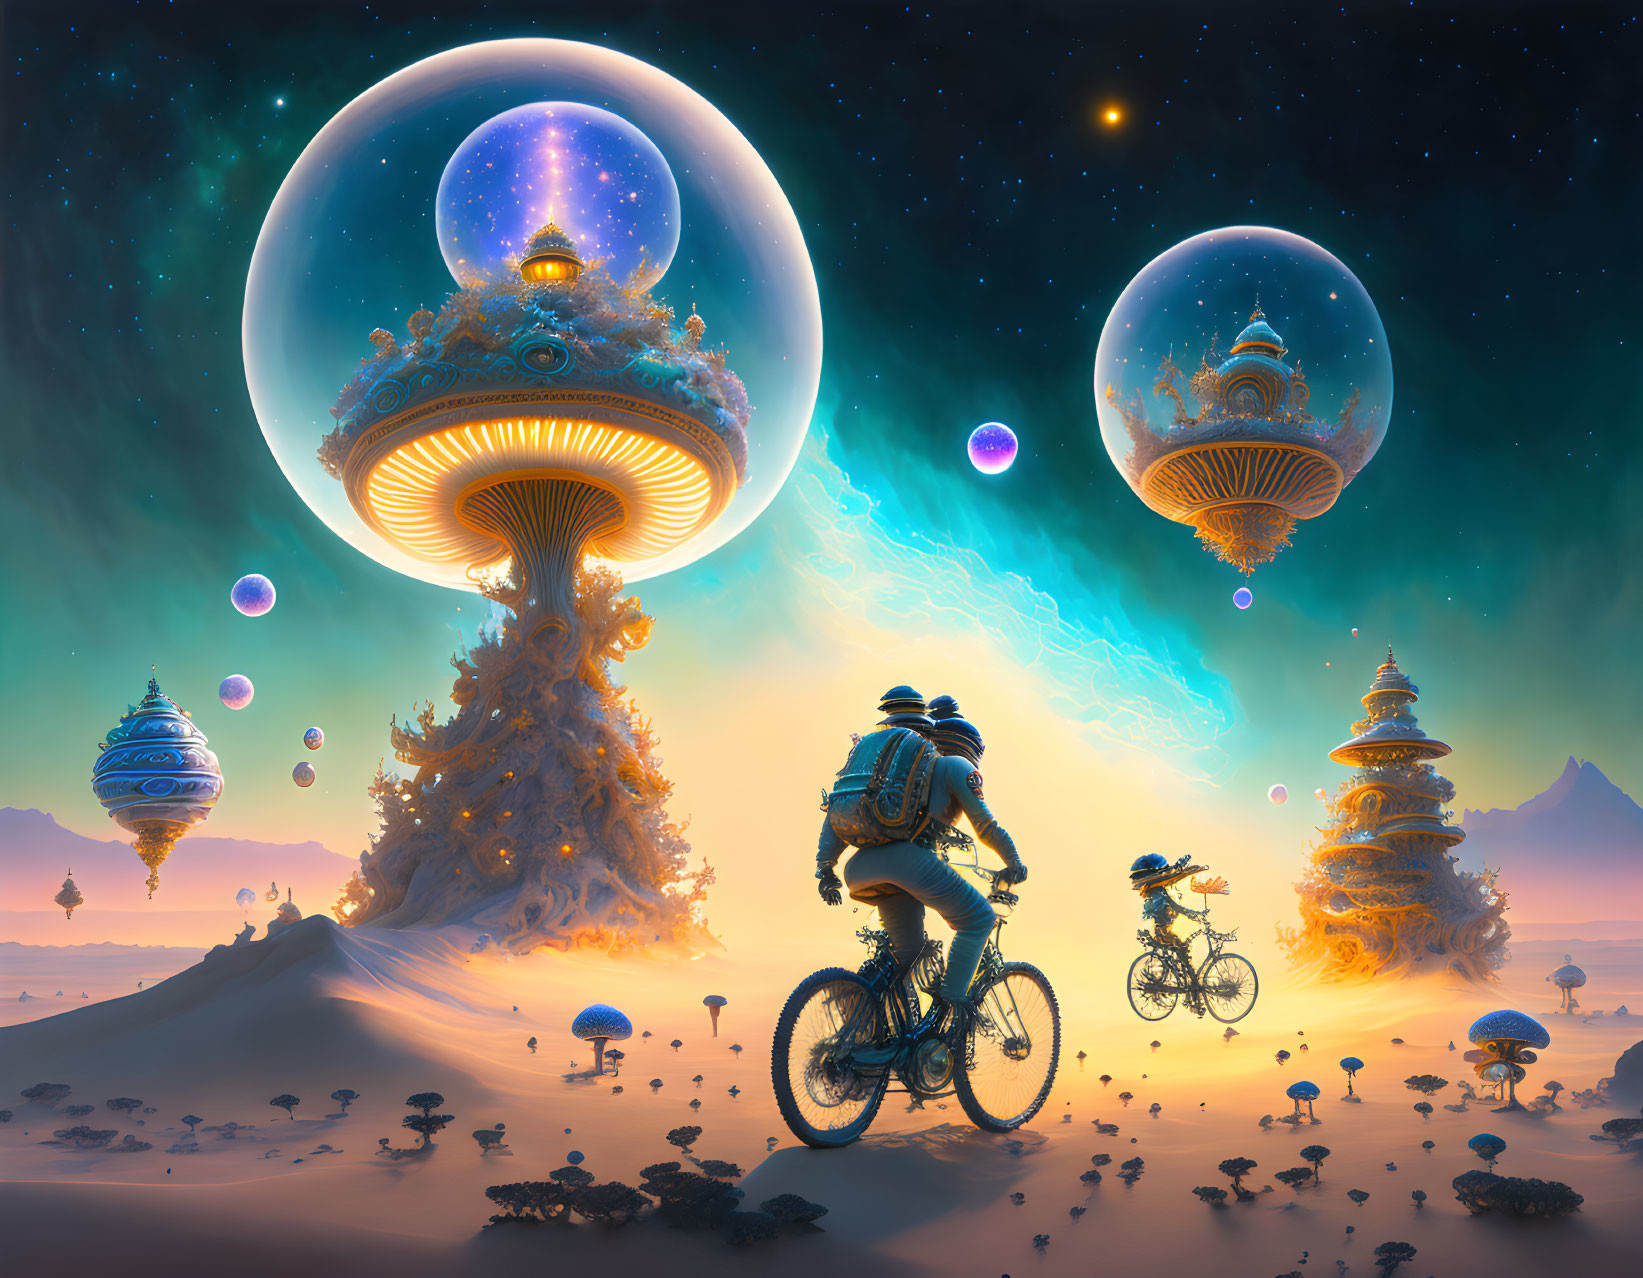 Person on Bike Views Fantasy Landscape with Floating Structures and Alien Trees